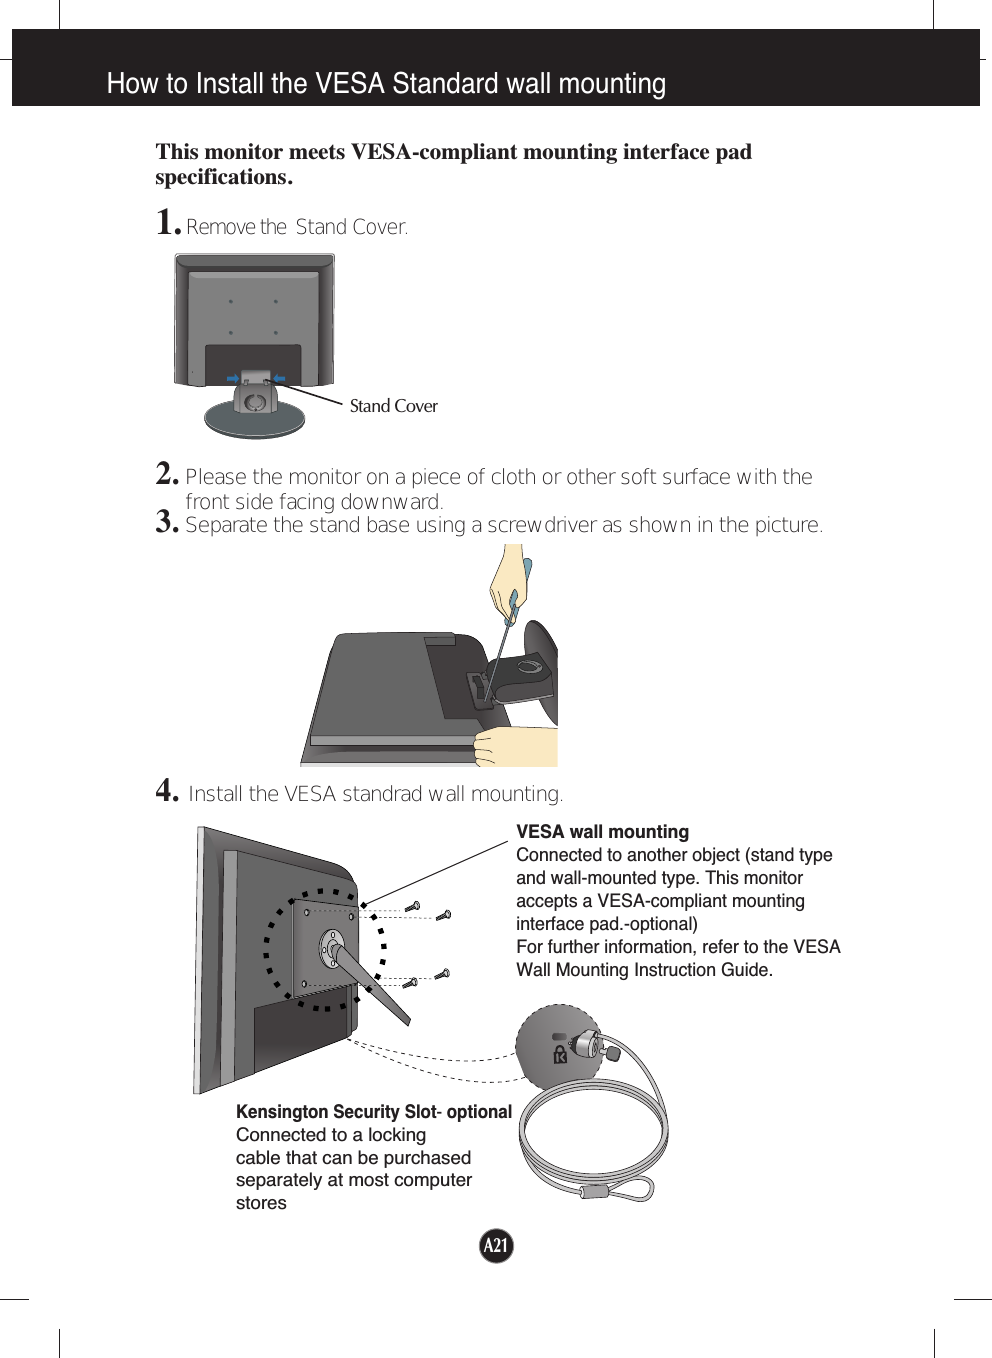 A21How to Install the VESA Standard wall mountingThis monitor meets VESA-compliant mounting interface padspecifications.1. Remove the  Stand Cover.2.Please the monitor on a piece of cloth or other soft surface with thefront side facing downward.3.Separate the stand base using a screwdriver as shown in the picture.4.Install the VESA standrad wall mounting.VESA wall mountingConnected to another object (stand typeand wall-mounted type. This monitoraccepts a VESA-compliant mountinginterface pad.-optional)For further information, refer to the VESAWall Mounting Instruction Guide.Kensington Security Slot- optionalConnected to a locking cable that can be purchasedseparately at most computerstoresStand Cover